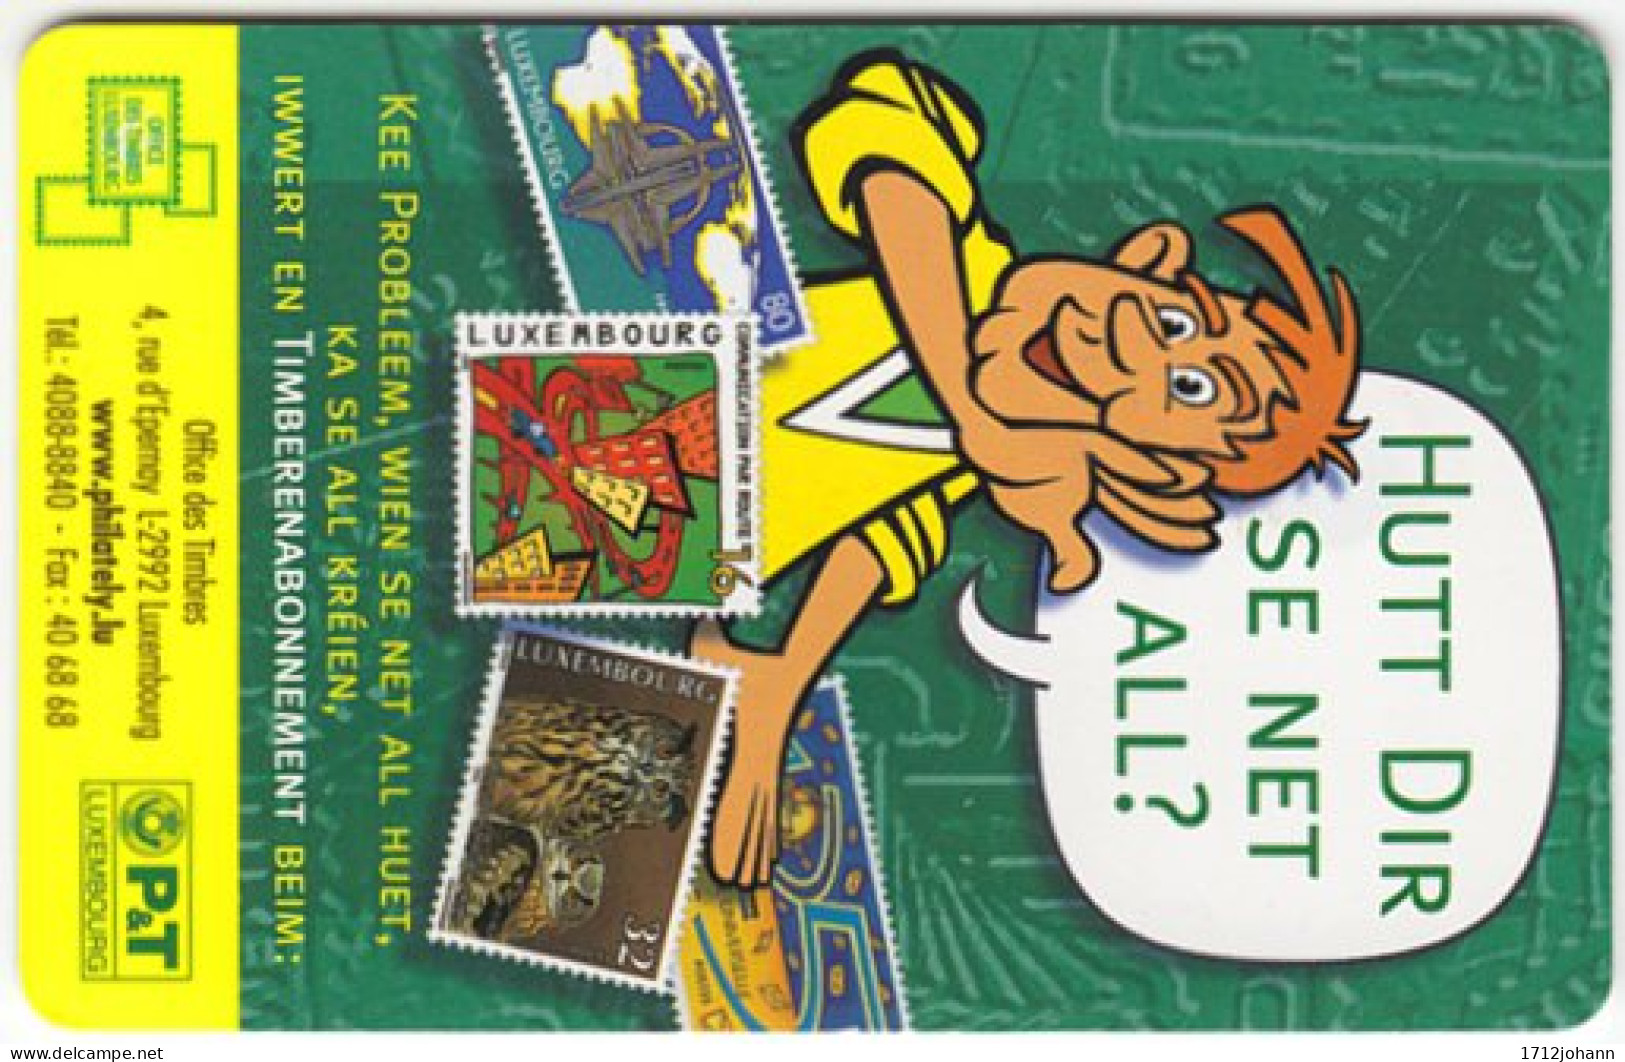 LUXEMBOURG A-212 Chip P&T - Cartoon, Collection, Stamps - Used - Lussemburgo